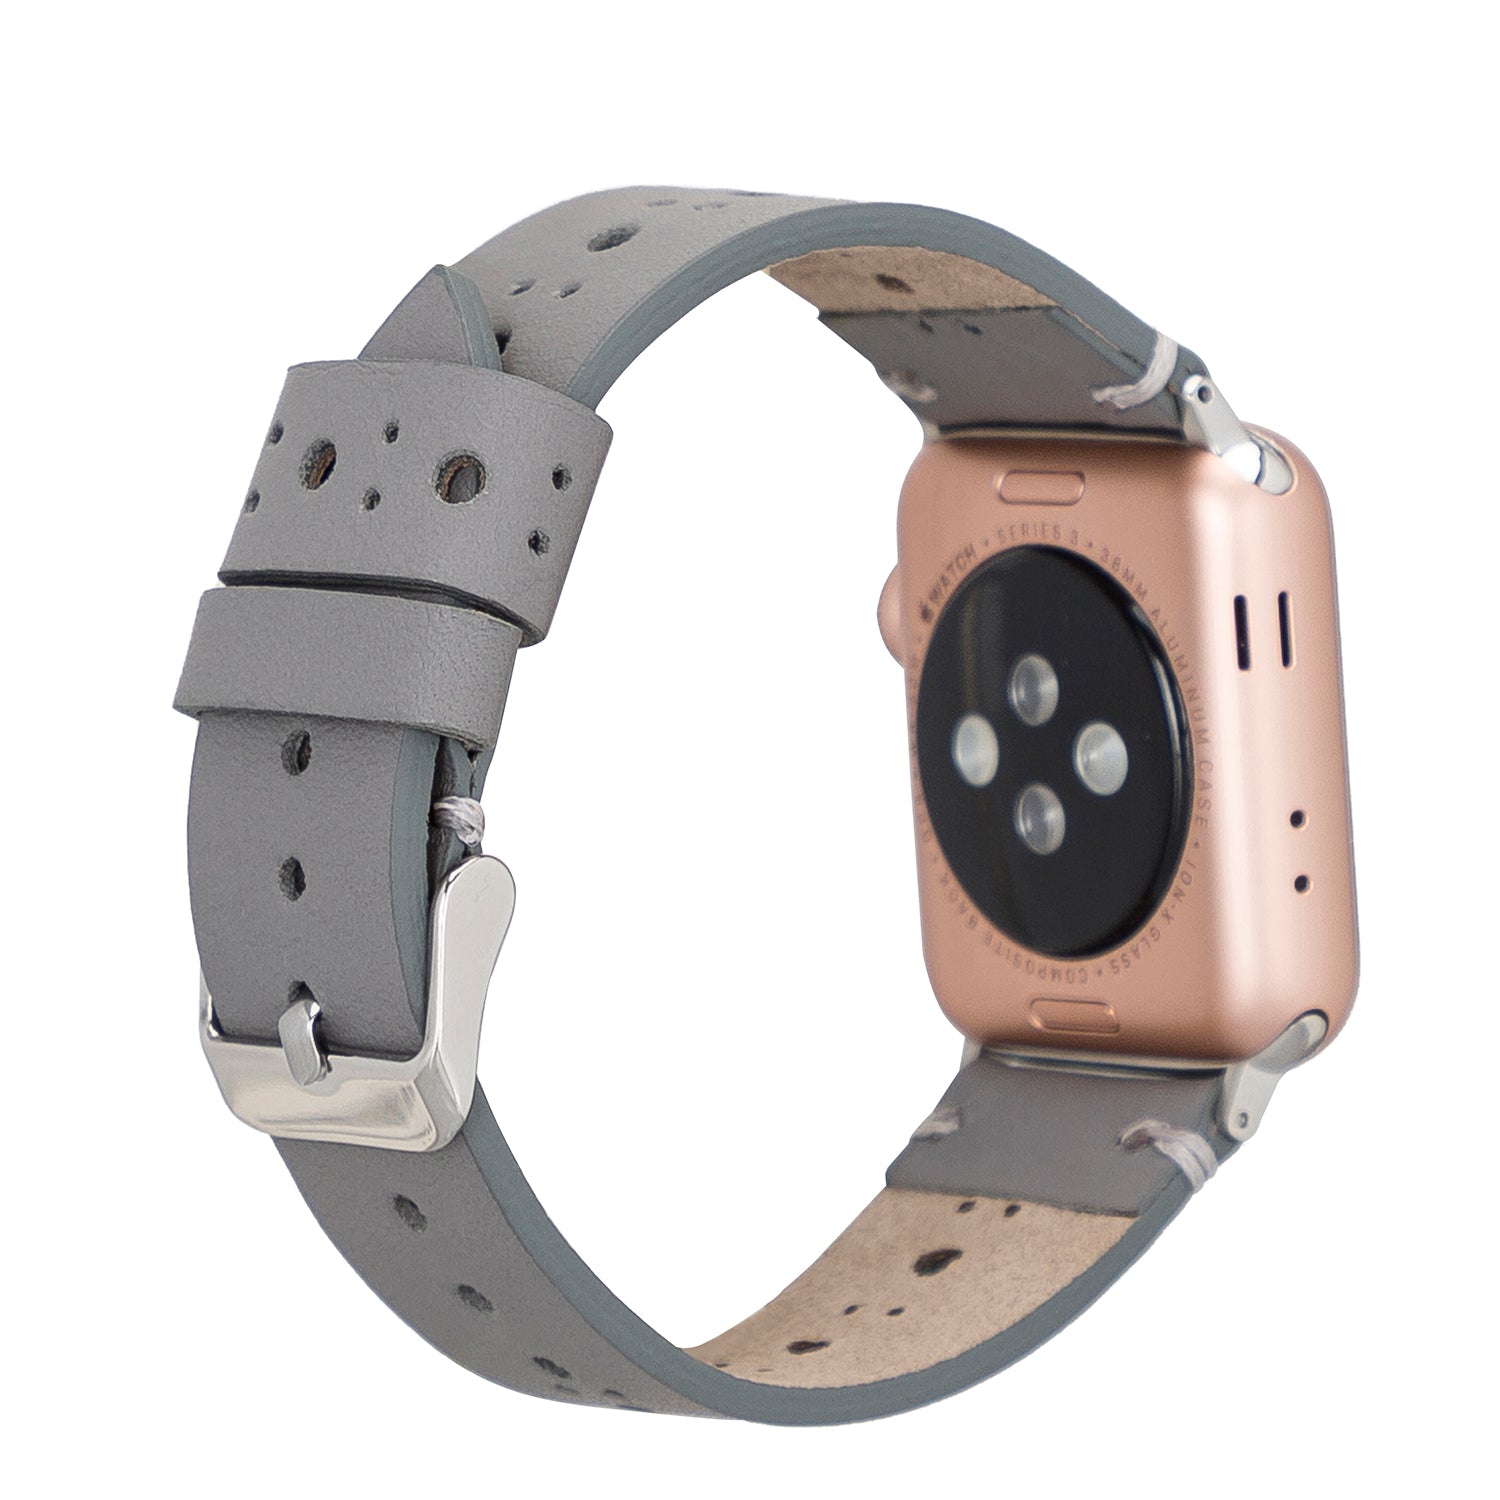 Full Grain Leather Band for Apple Watch - GRAY